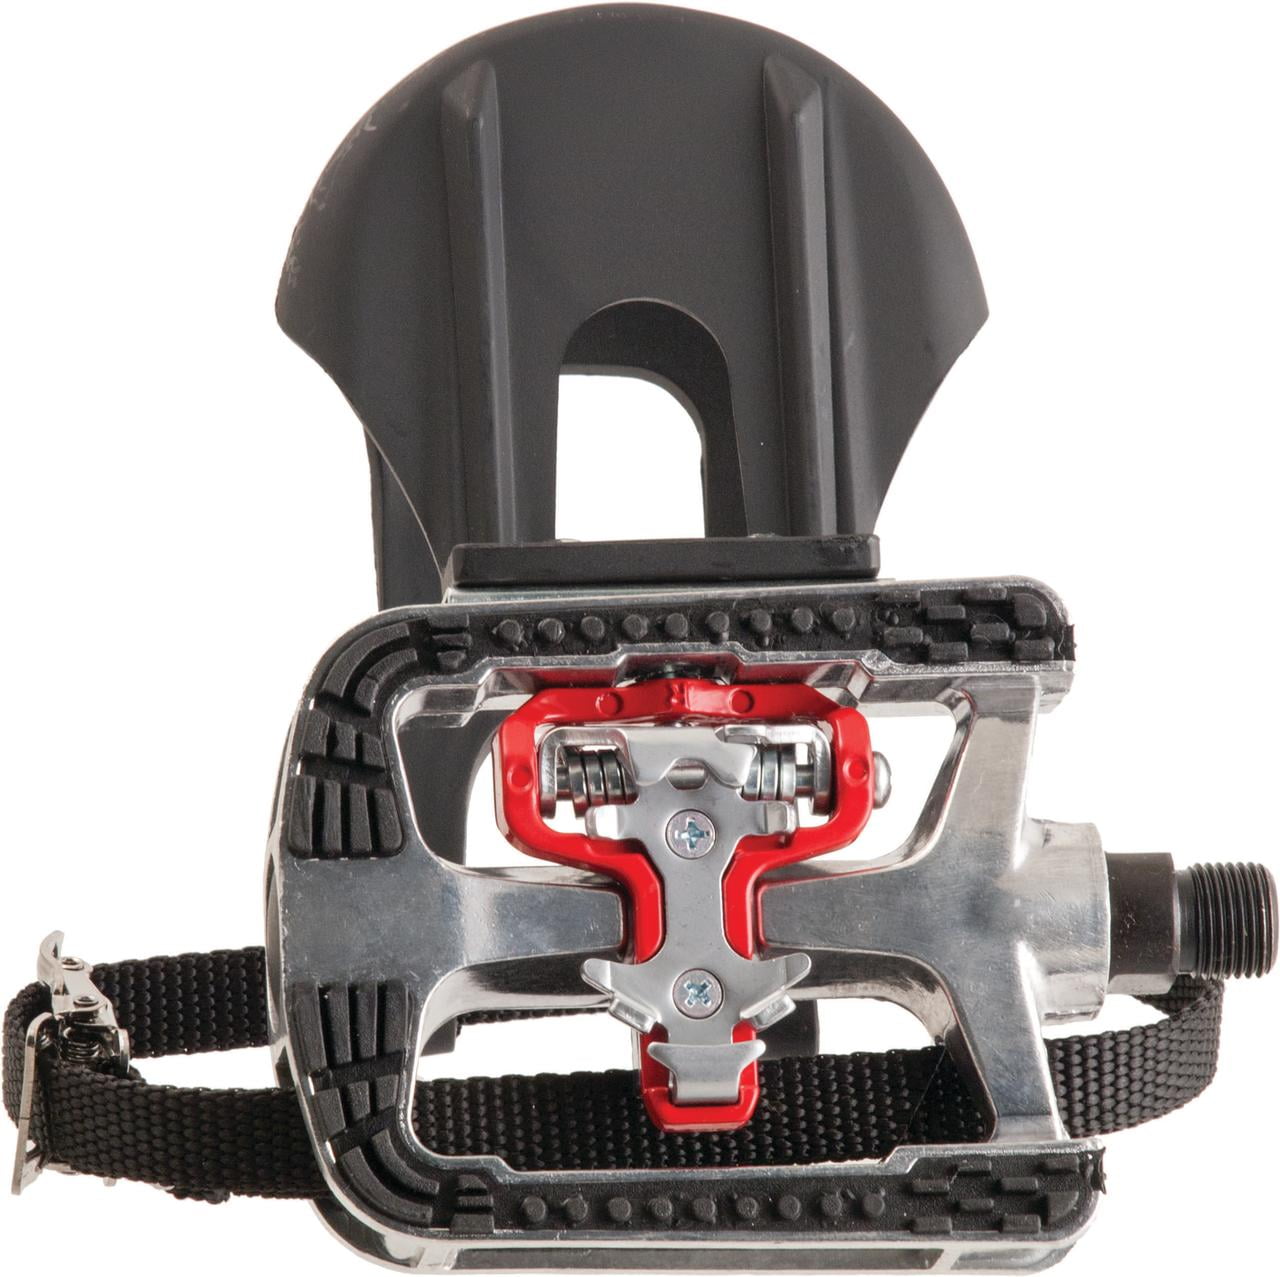 wellgo pedals with toe clips